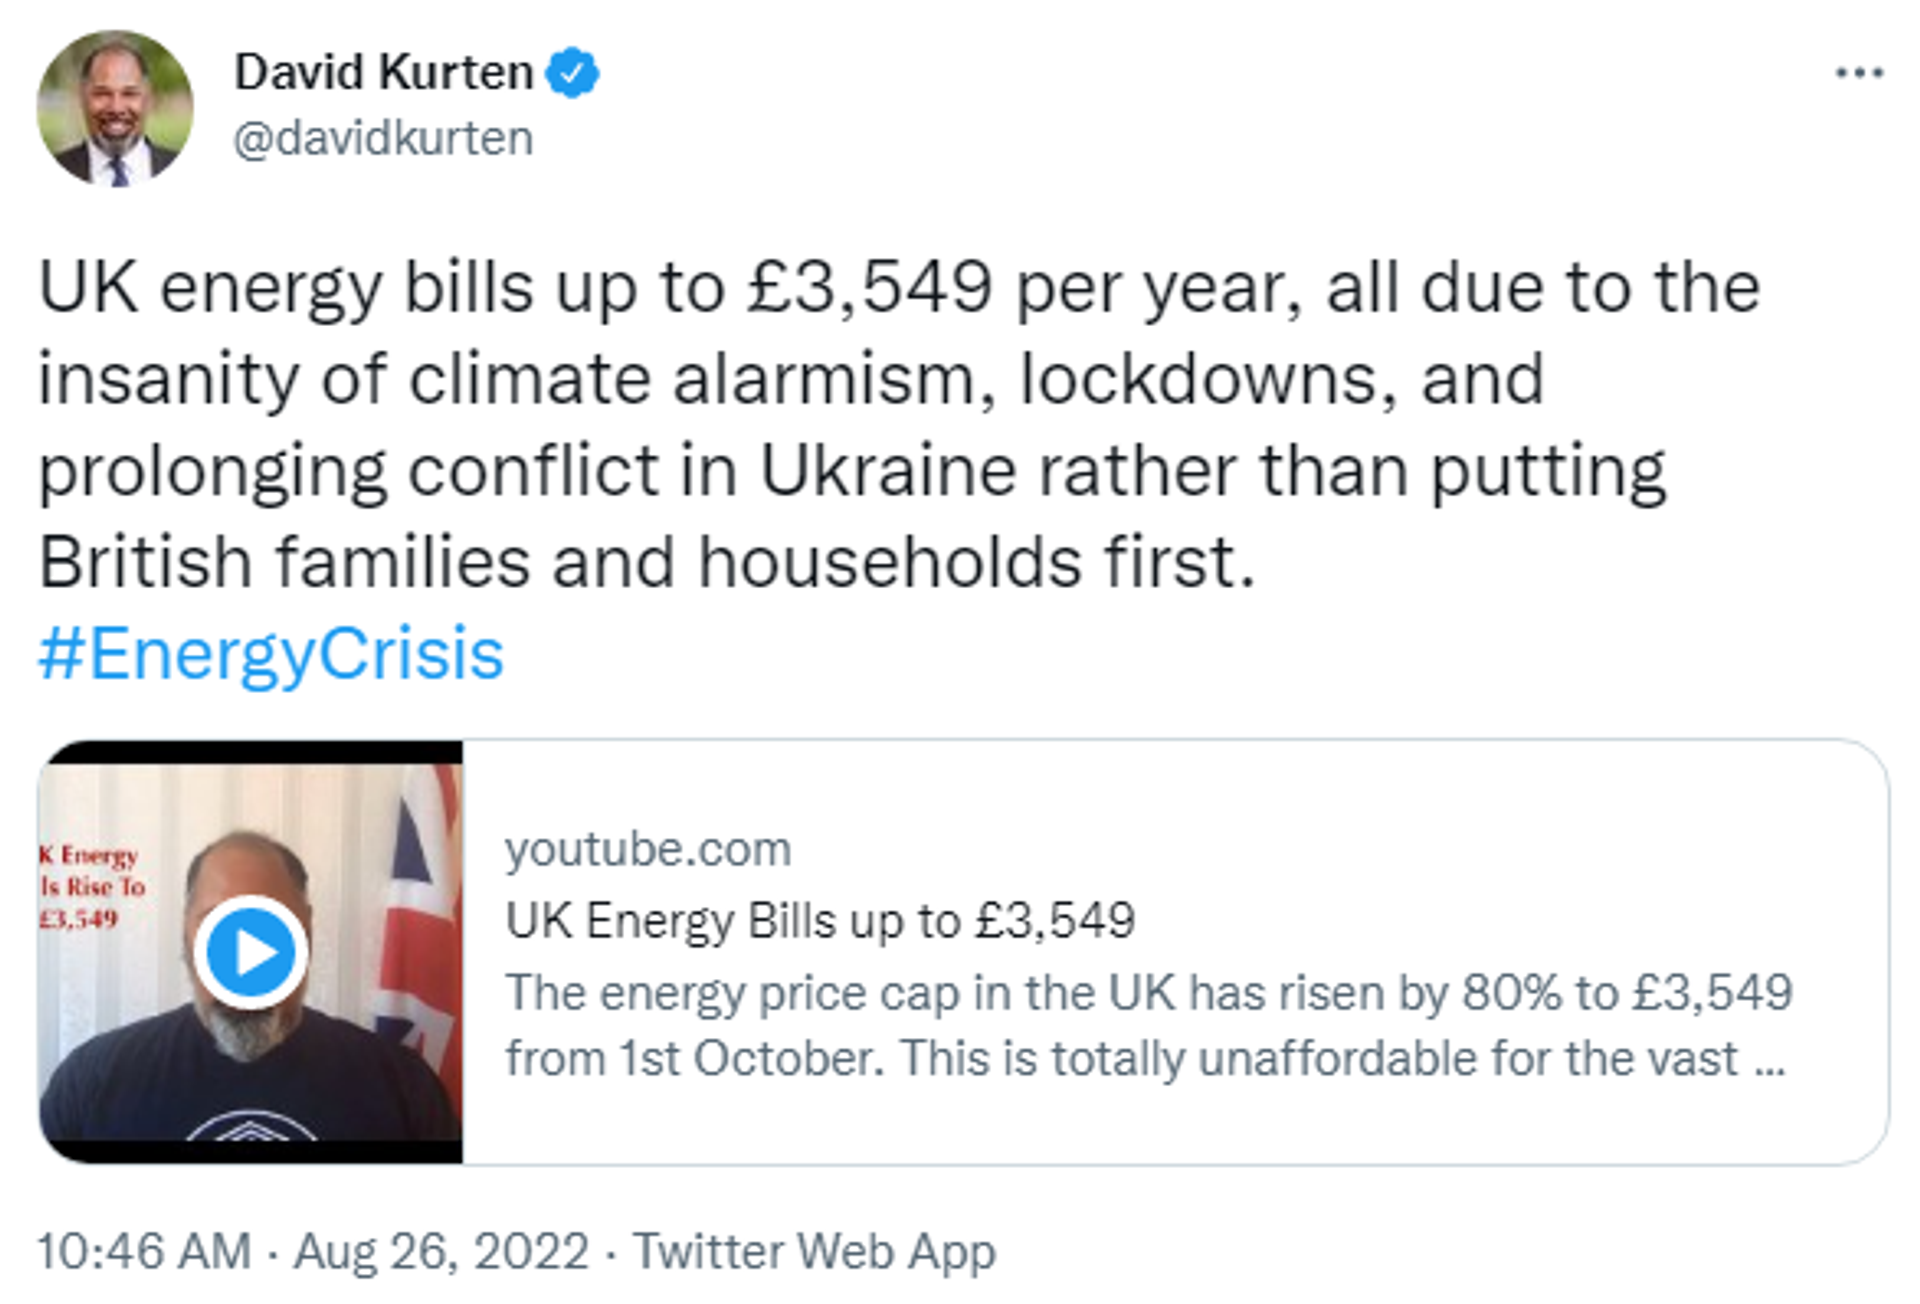 Tweet blaming the UK government policies including support for Ukraine in its conflict with Russia, for the energy crisis - Sputnik International, 1920, 26.08.2022